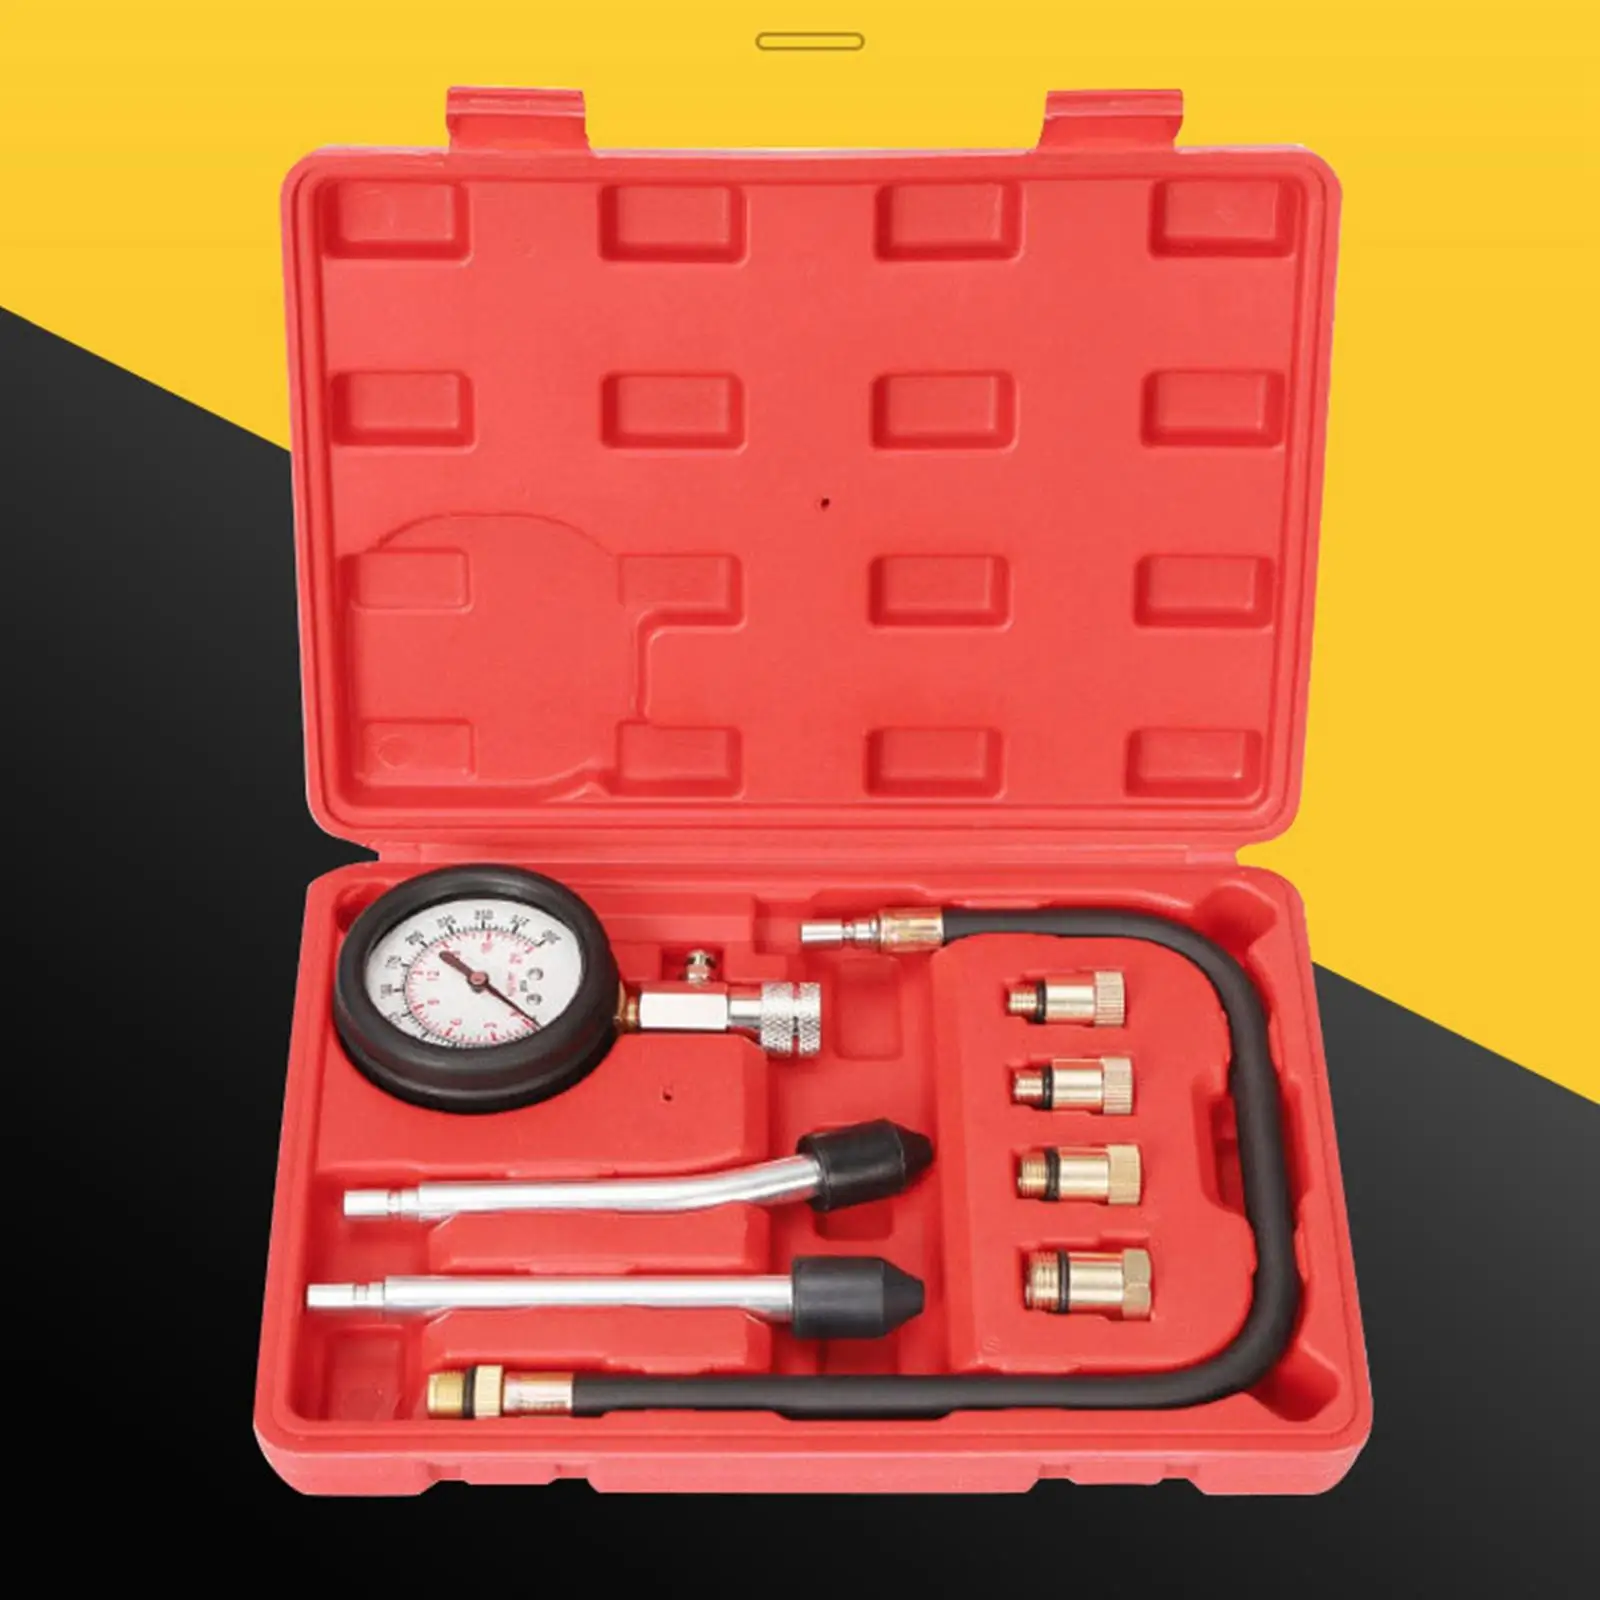 8Pcs Car Gas Engine Cylinder Compression Tester Gauge Kit 0-300 PSI with Case 4 Brass Adapter in Different Size Leakage Test